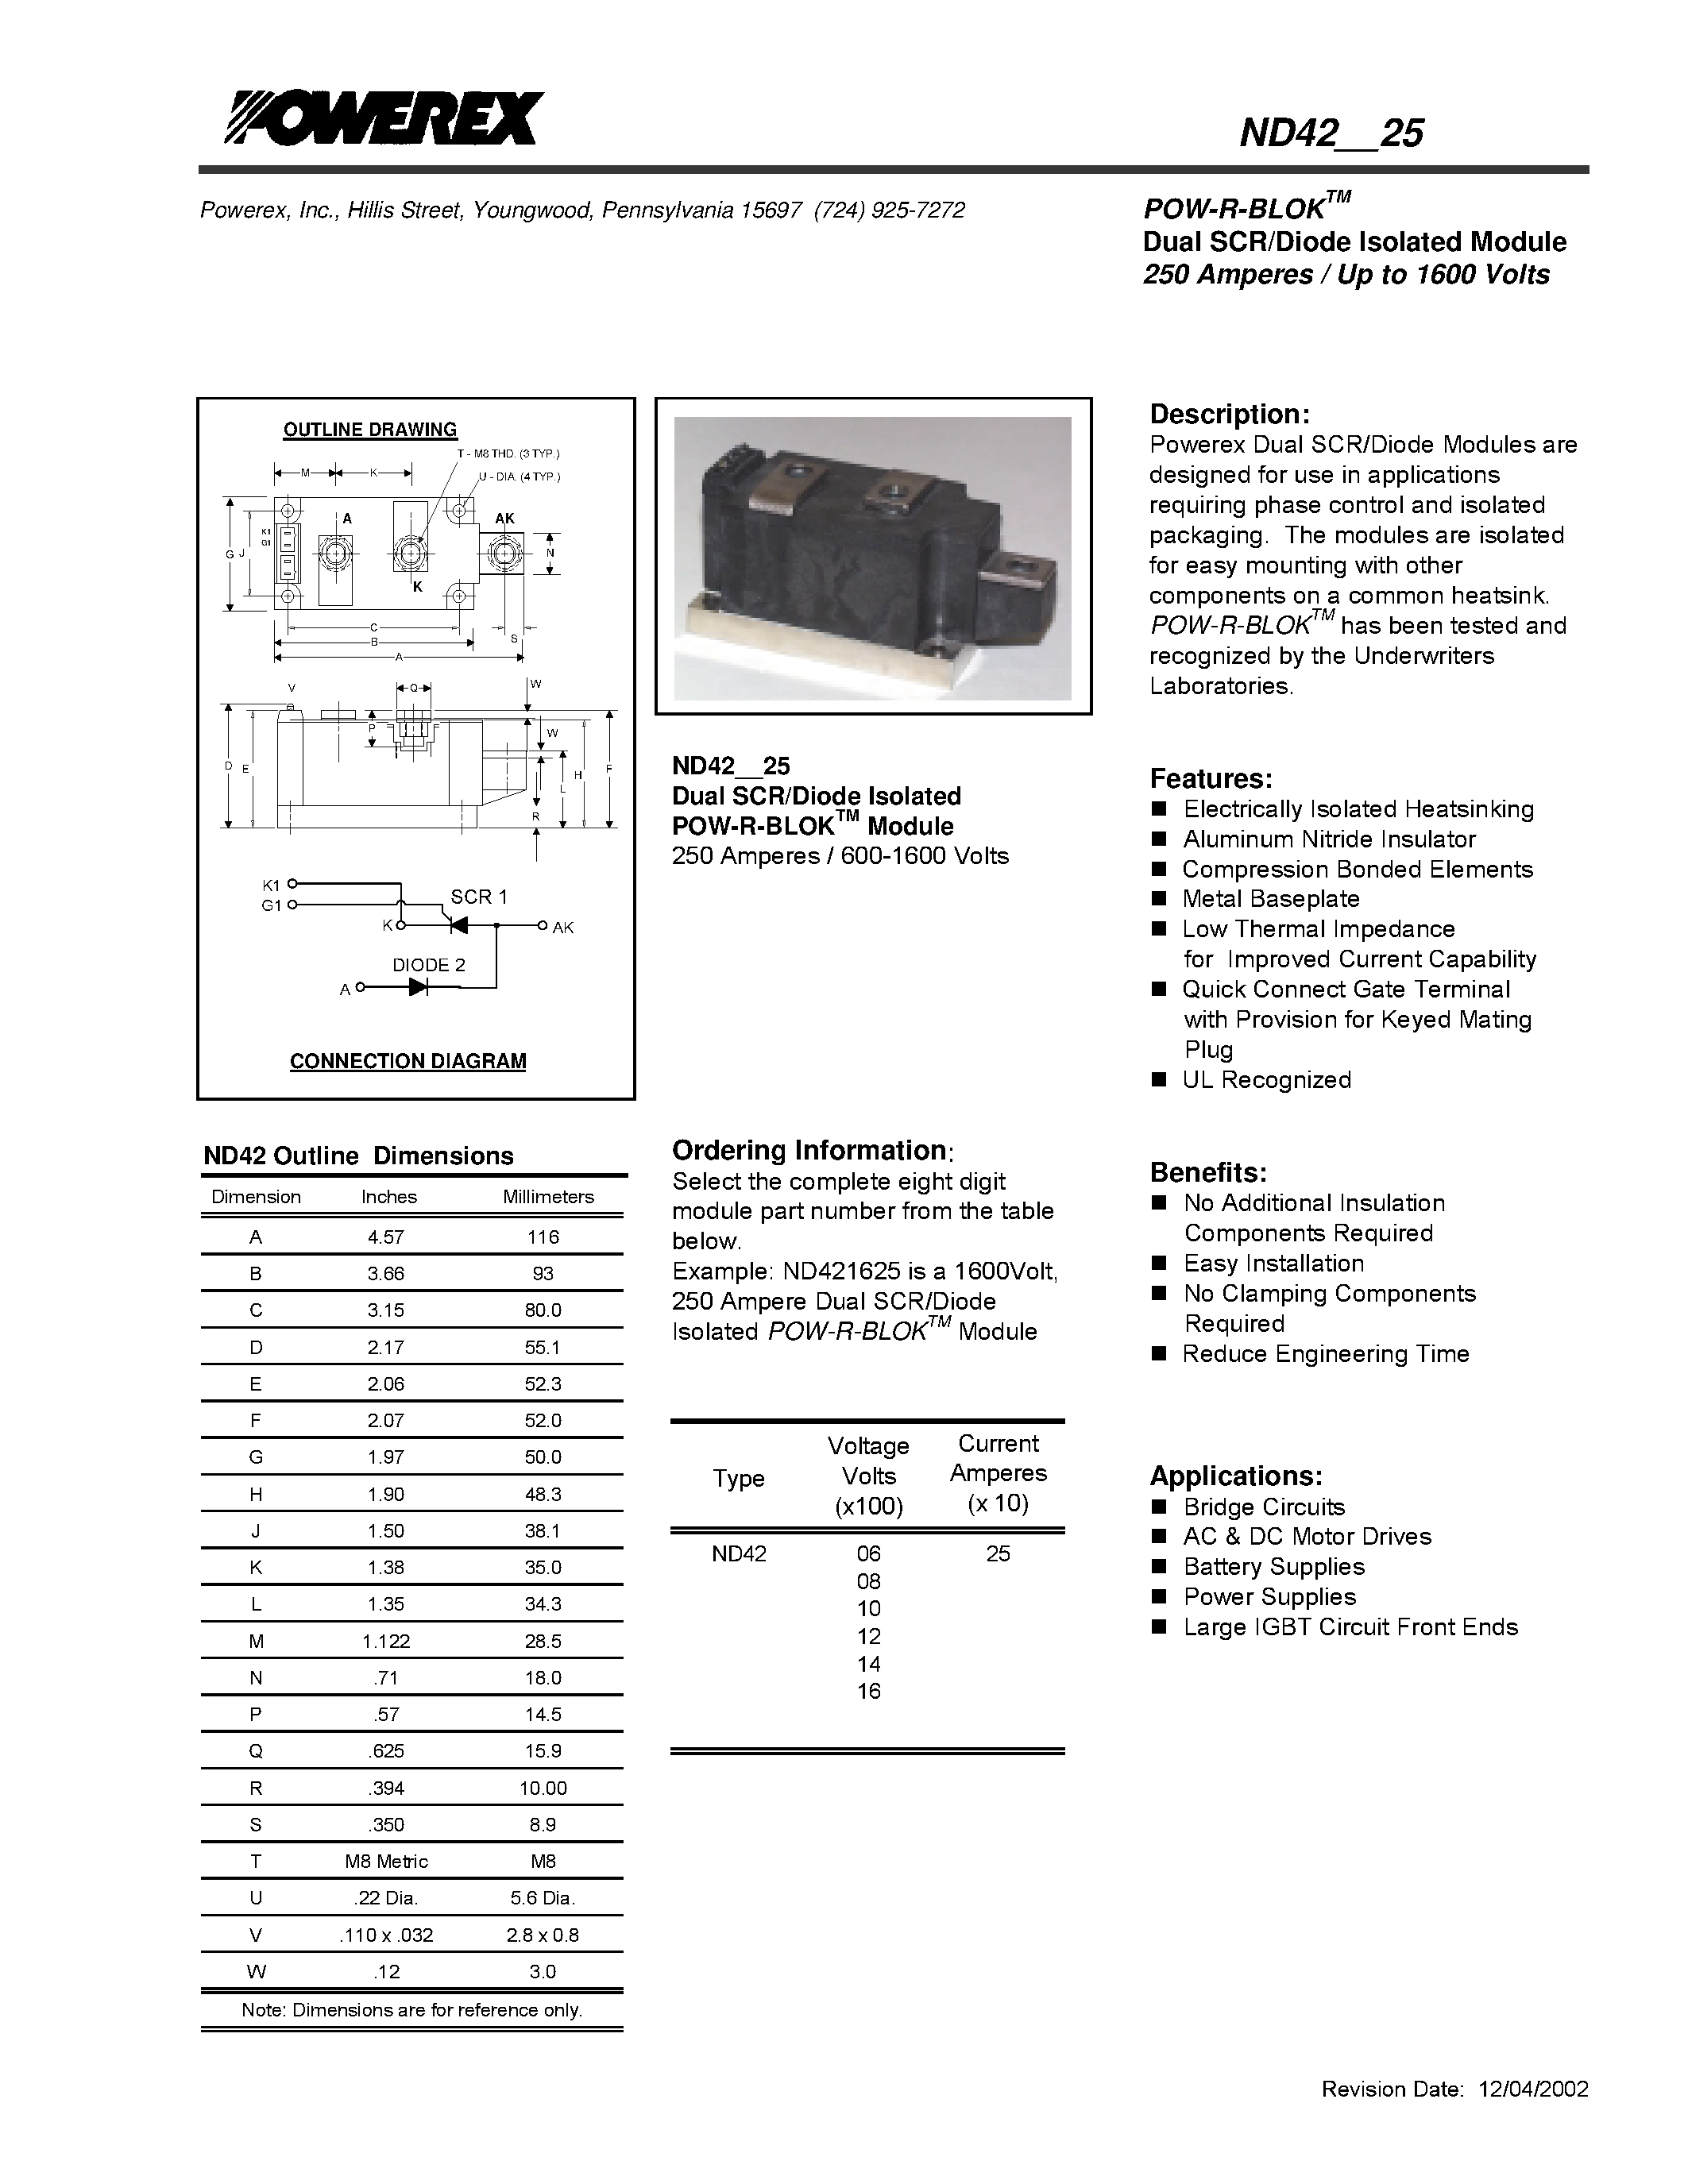 Datasheet ND420825 - POW-R-BLOK Dual SCR/Diode Isolated Module (250 Amperes / Up to 1600 Volts) page 1